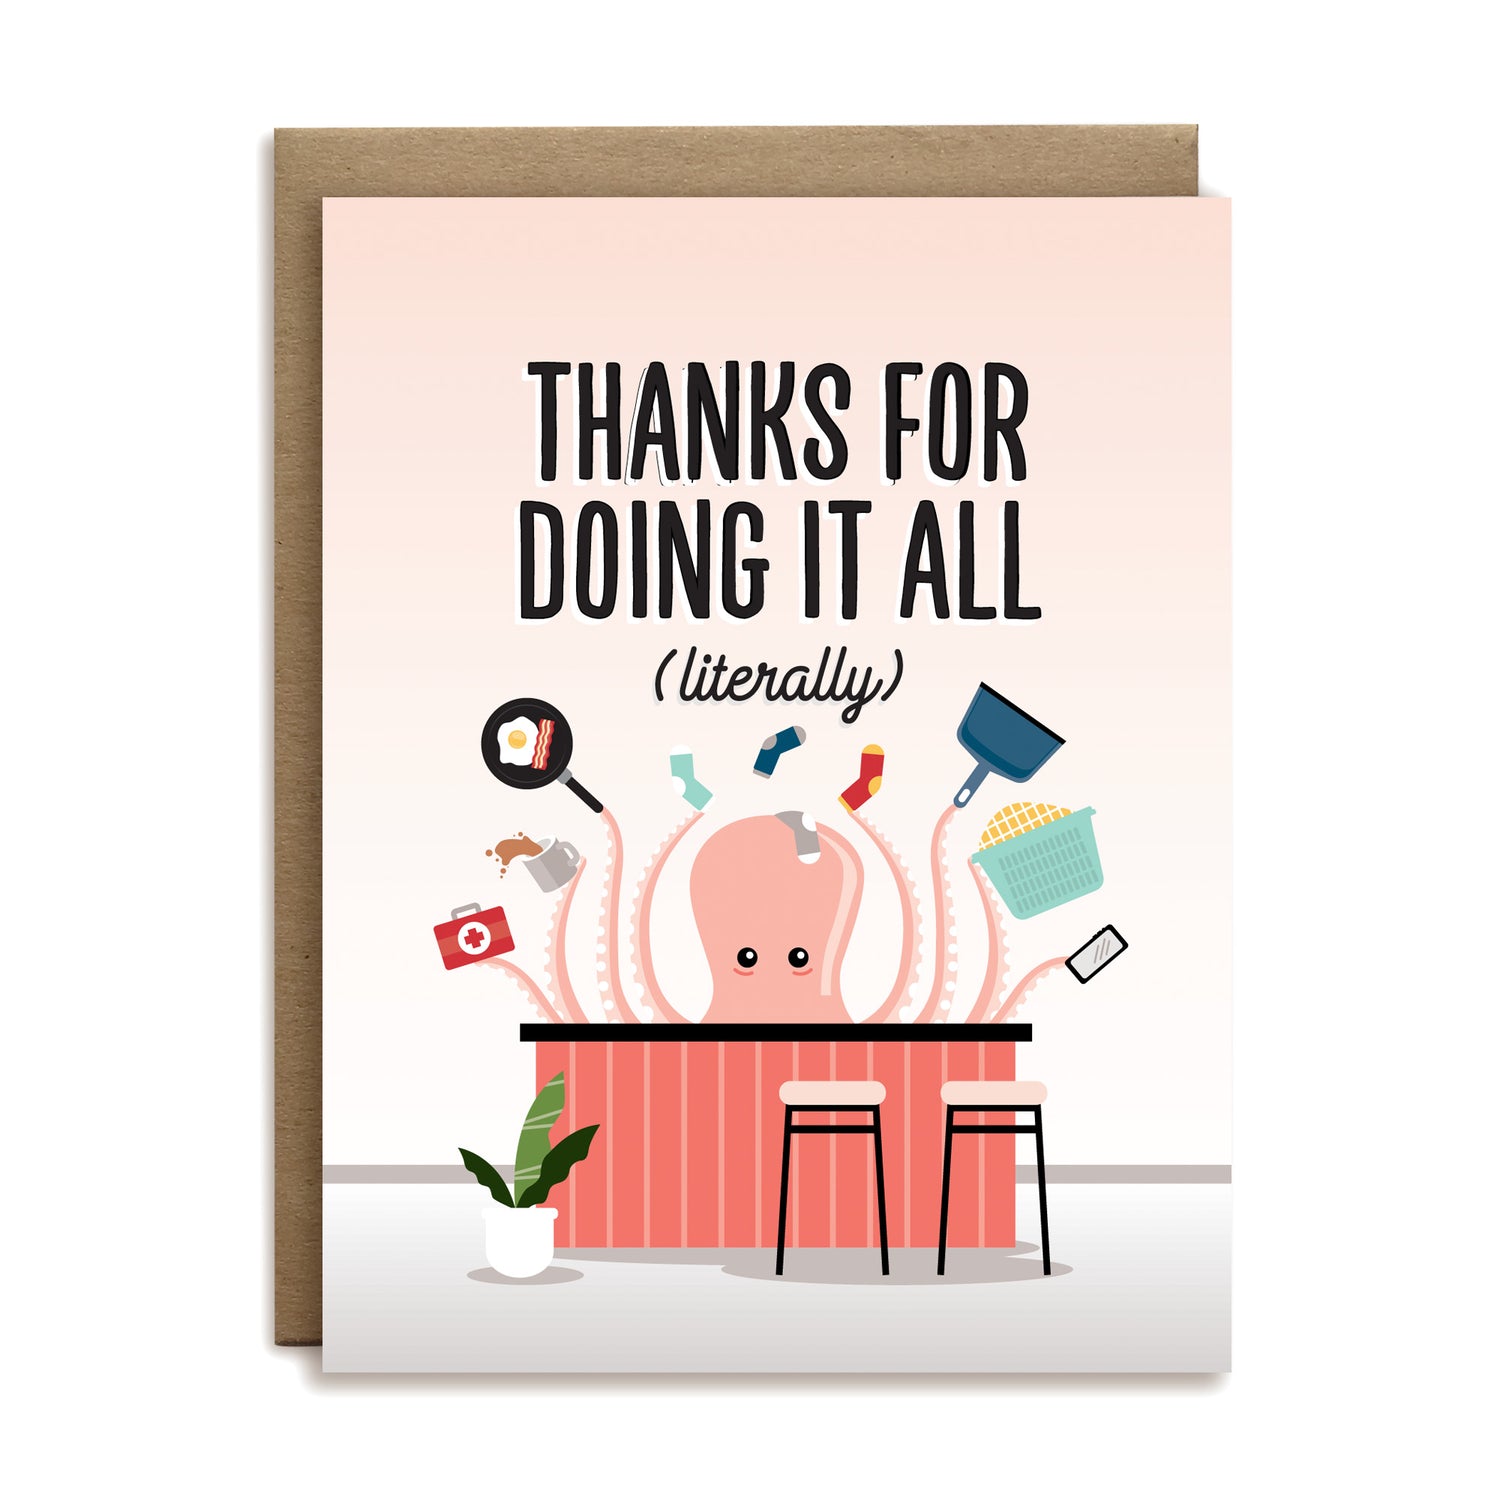 Thanks for doing it all (literally) thank you greeting card by I&